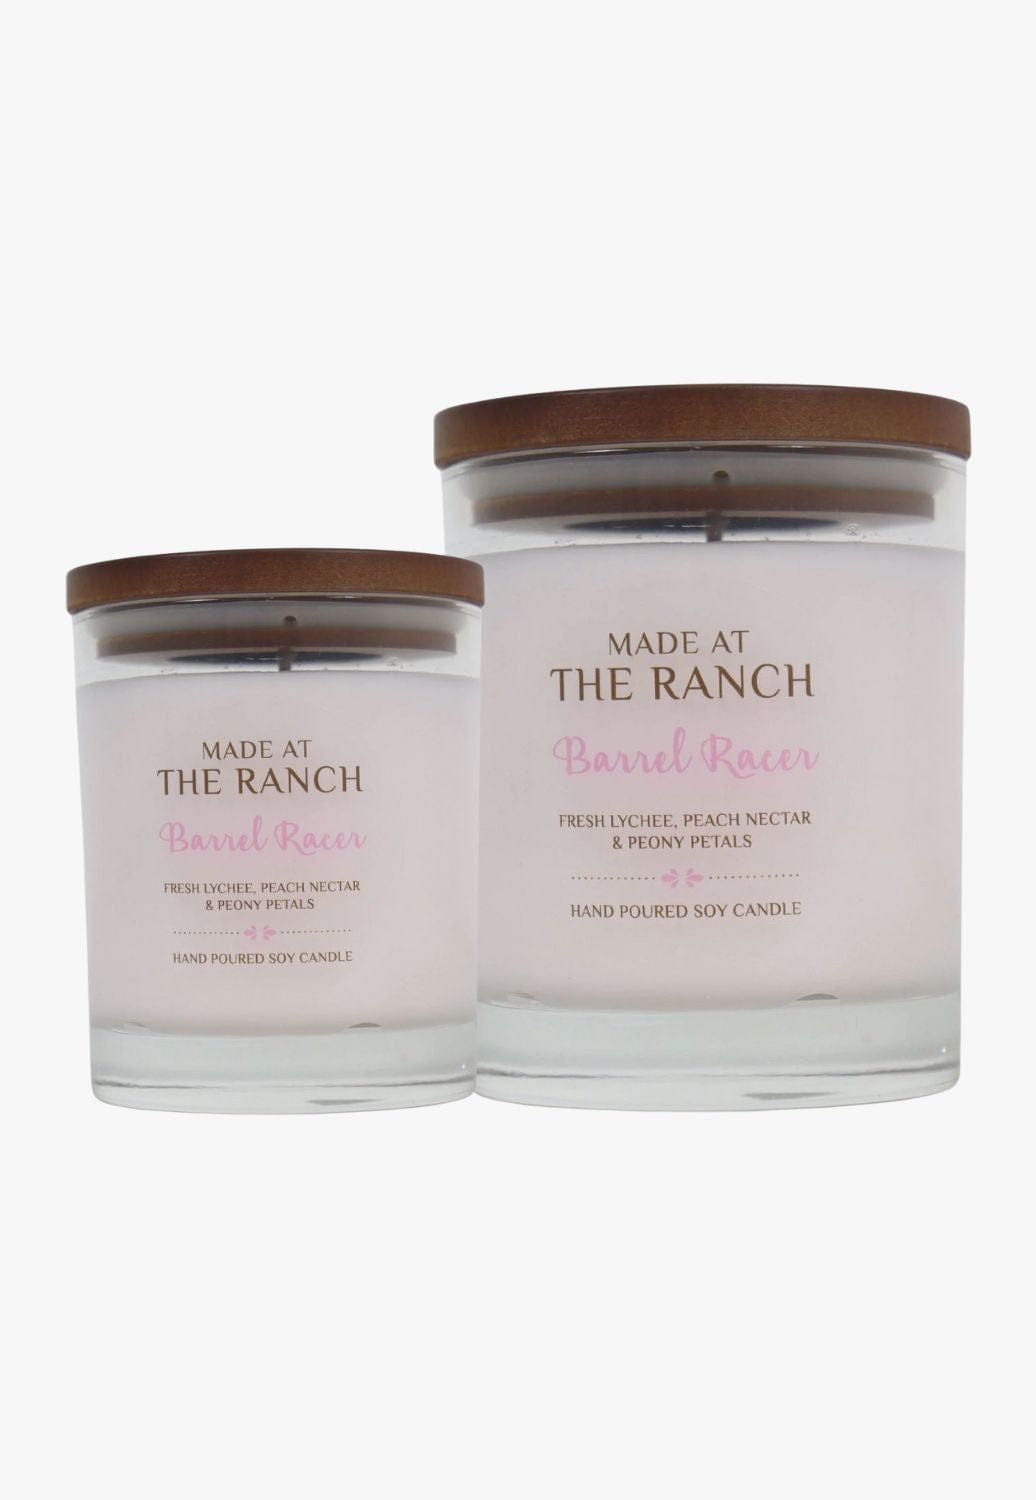 Made at The Ranch Homewares - General Made at The Ranch Barrel Racer Candle